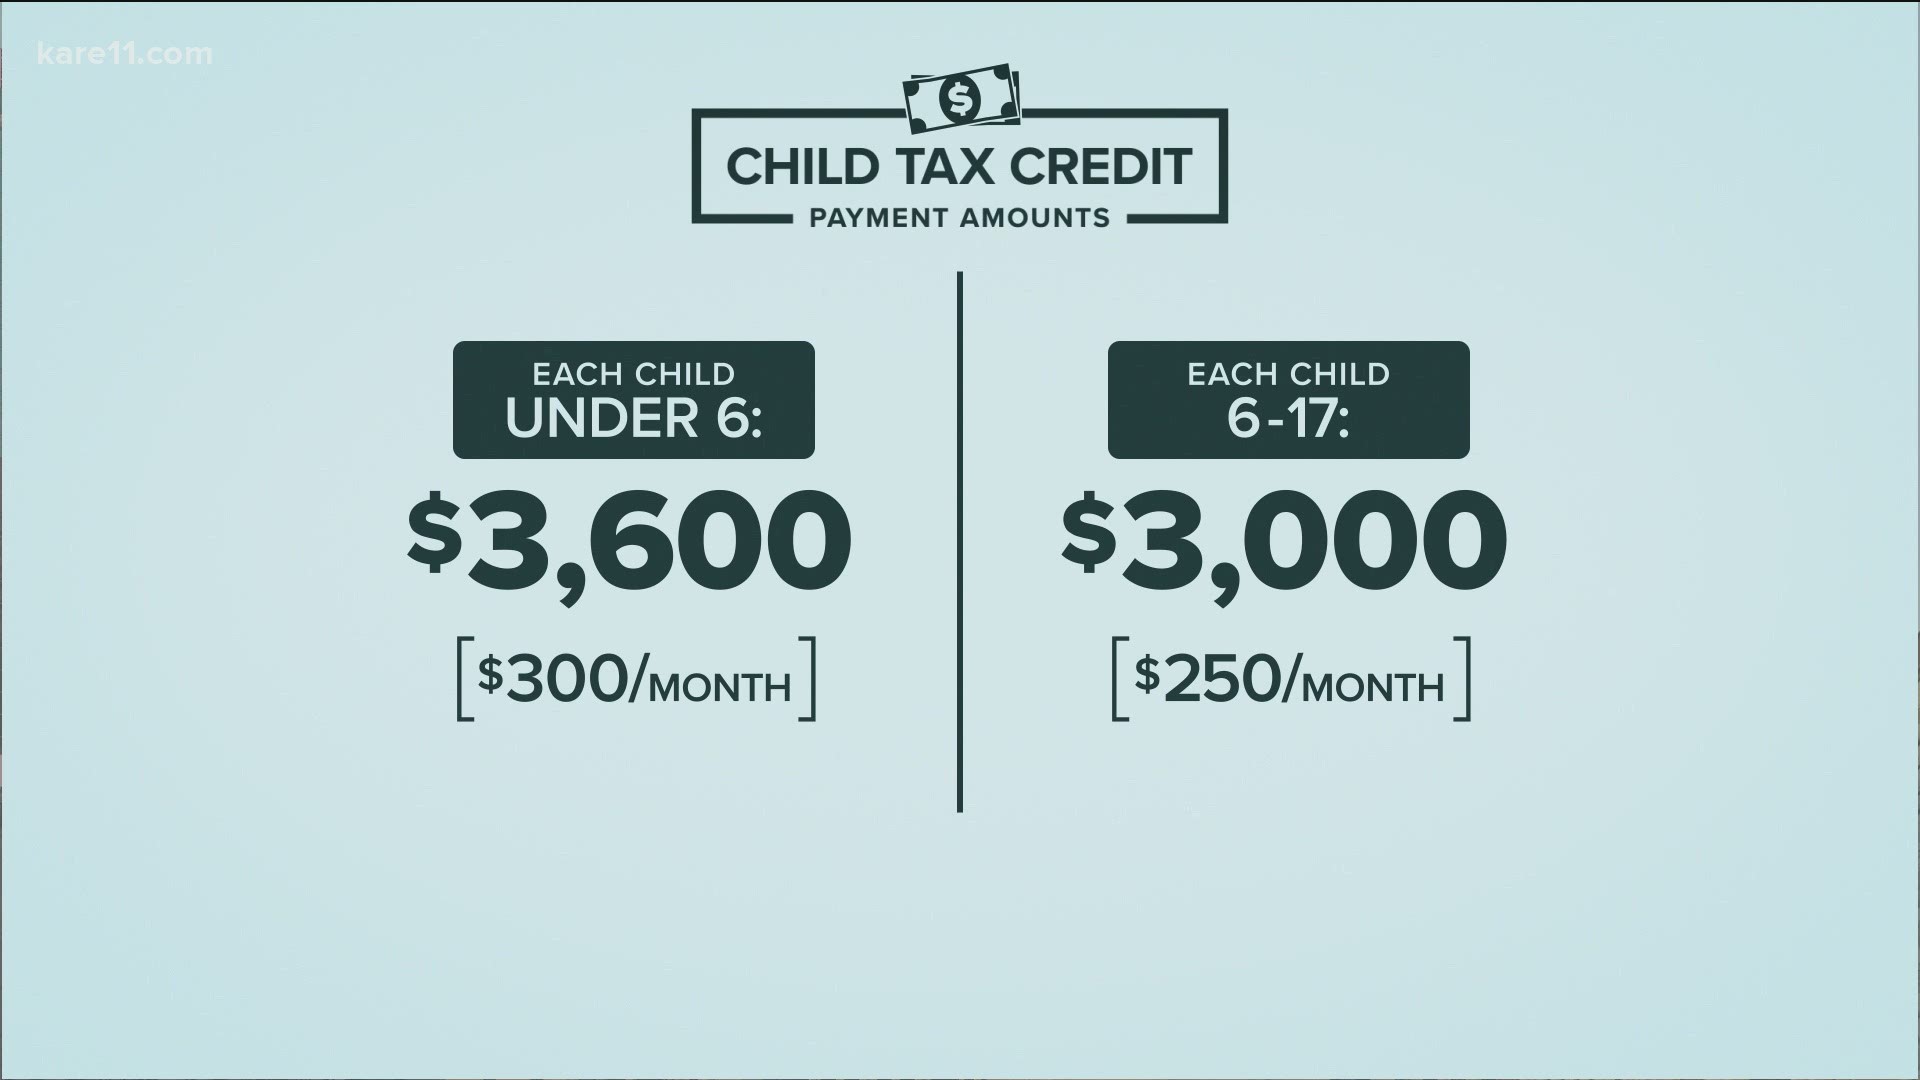 Biden has held out the new monthly payments, which will average $423 per family, as the key to halving child poverty rates.